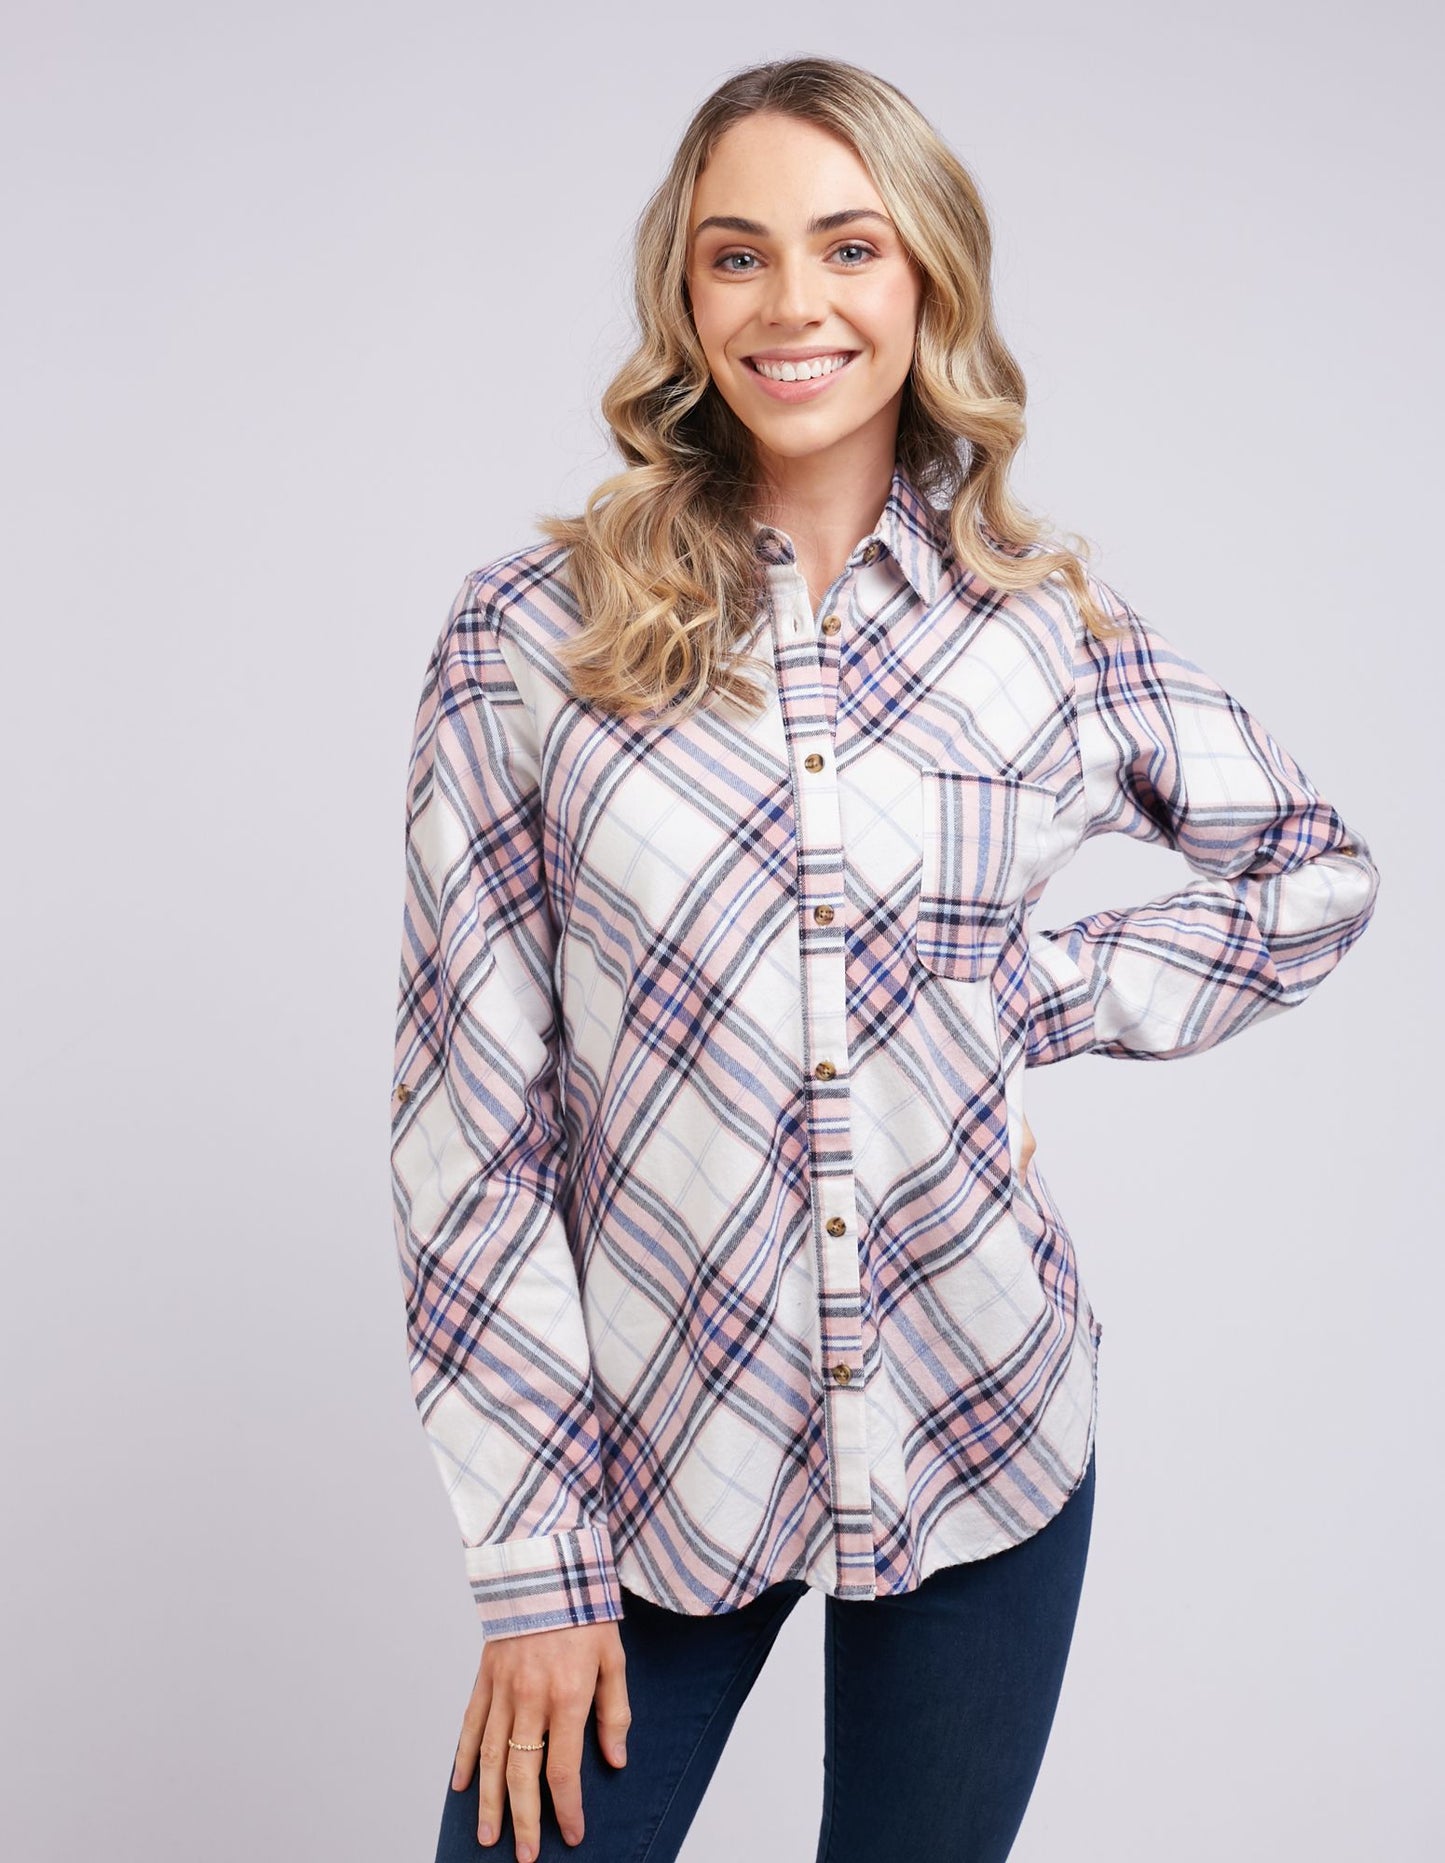 Aster Check Shirt - White/Pink/Blue Chk - Elm Lifestyle - FUDGE Gifts Home Lifestyle